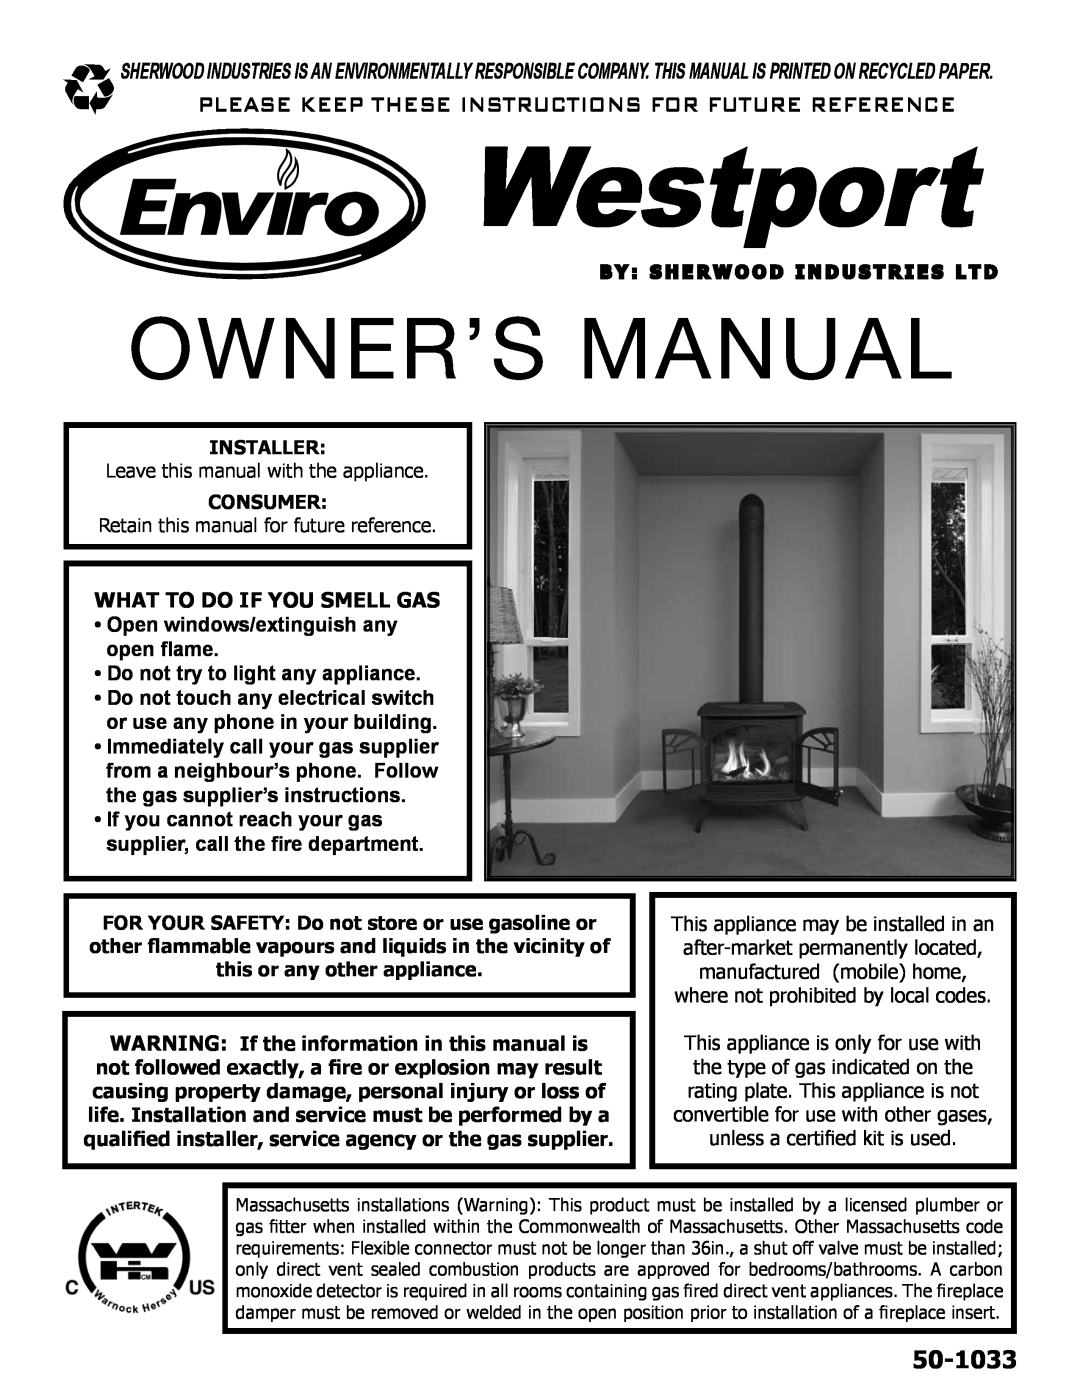 Enviro C-11290, C-10381 owner manual What To Do If You Smell Gas, Installer, Consumer, Westport, 50-1033 